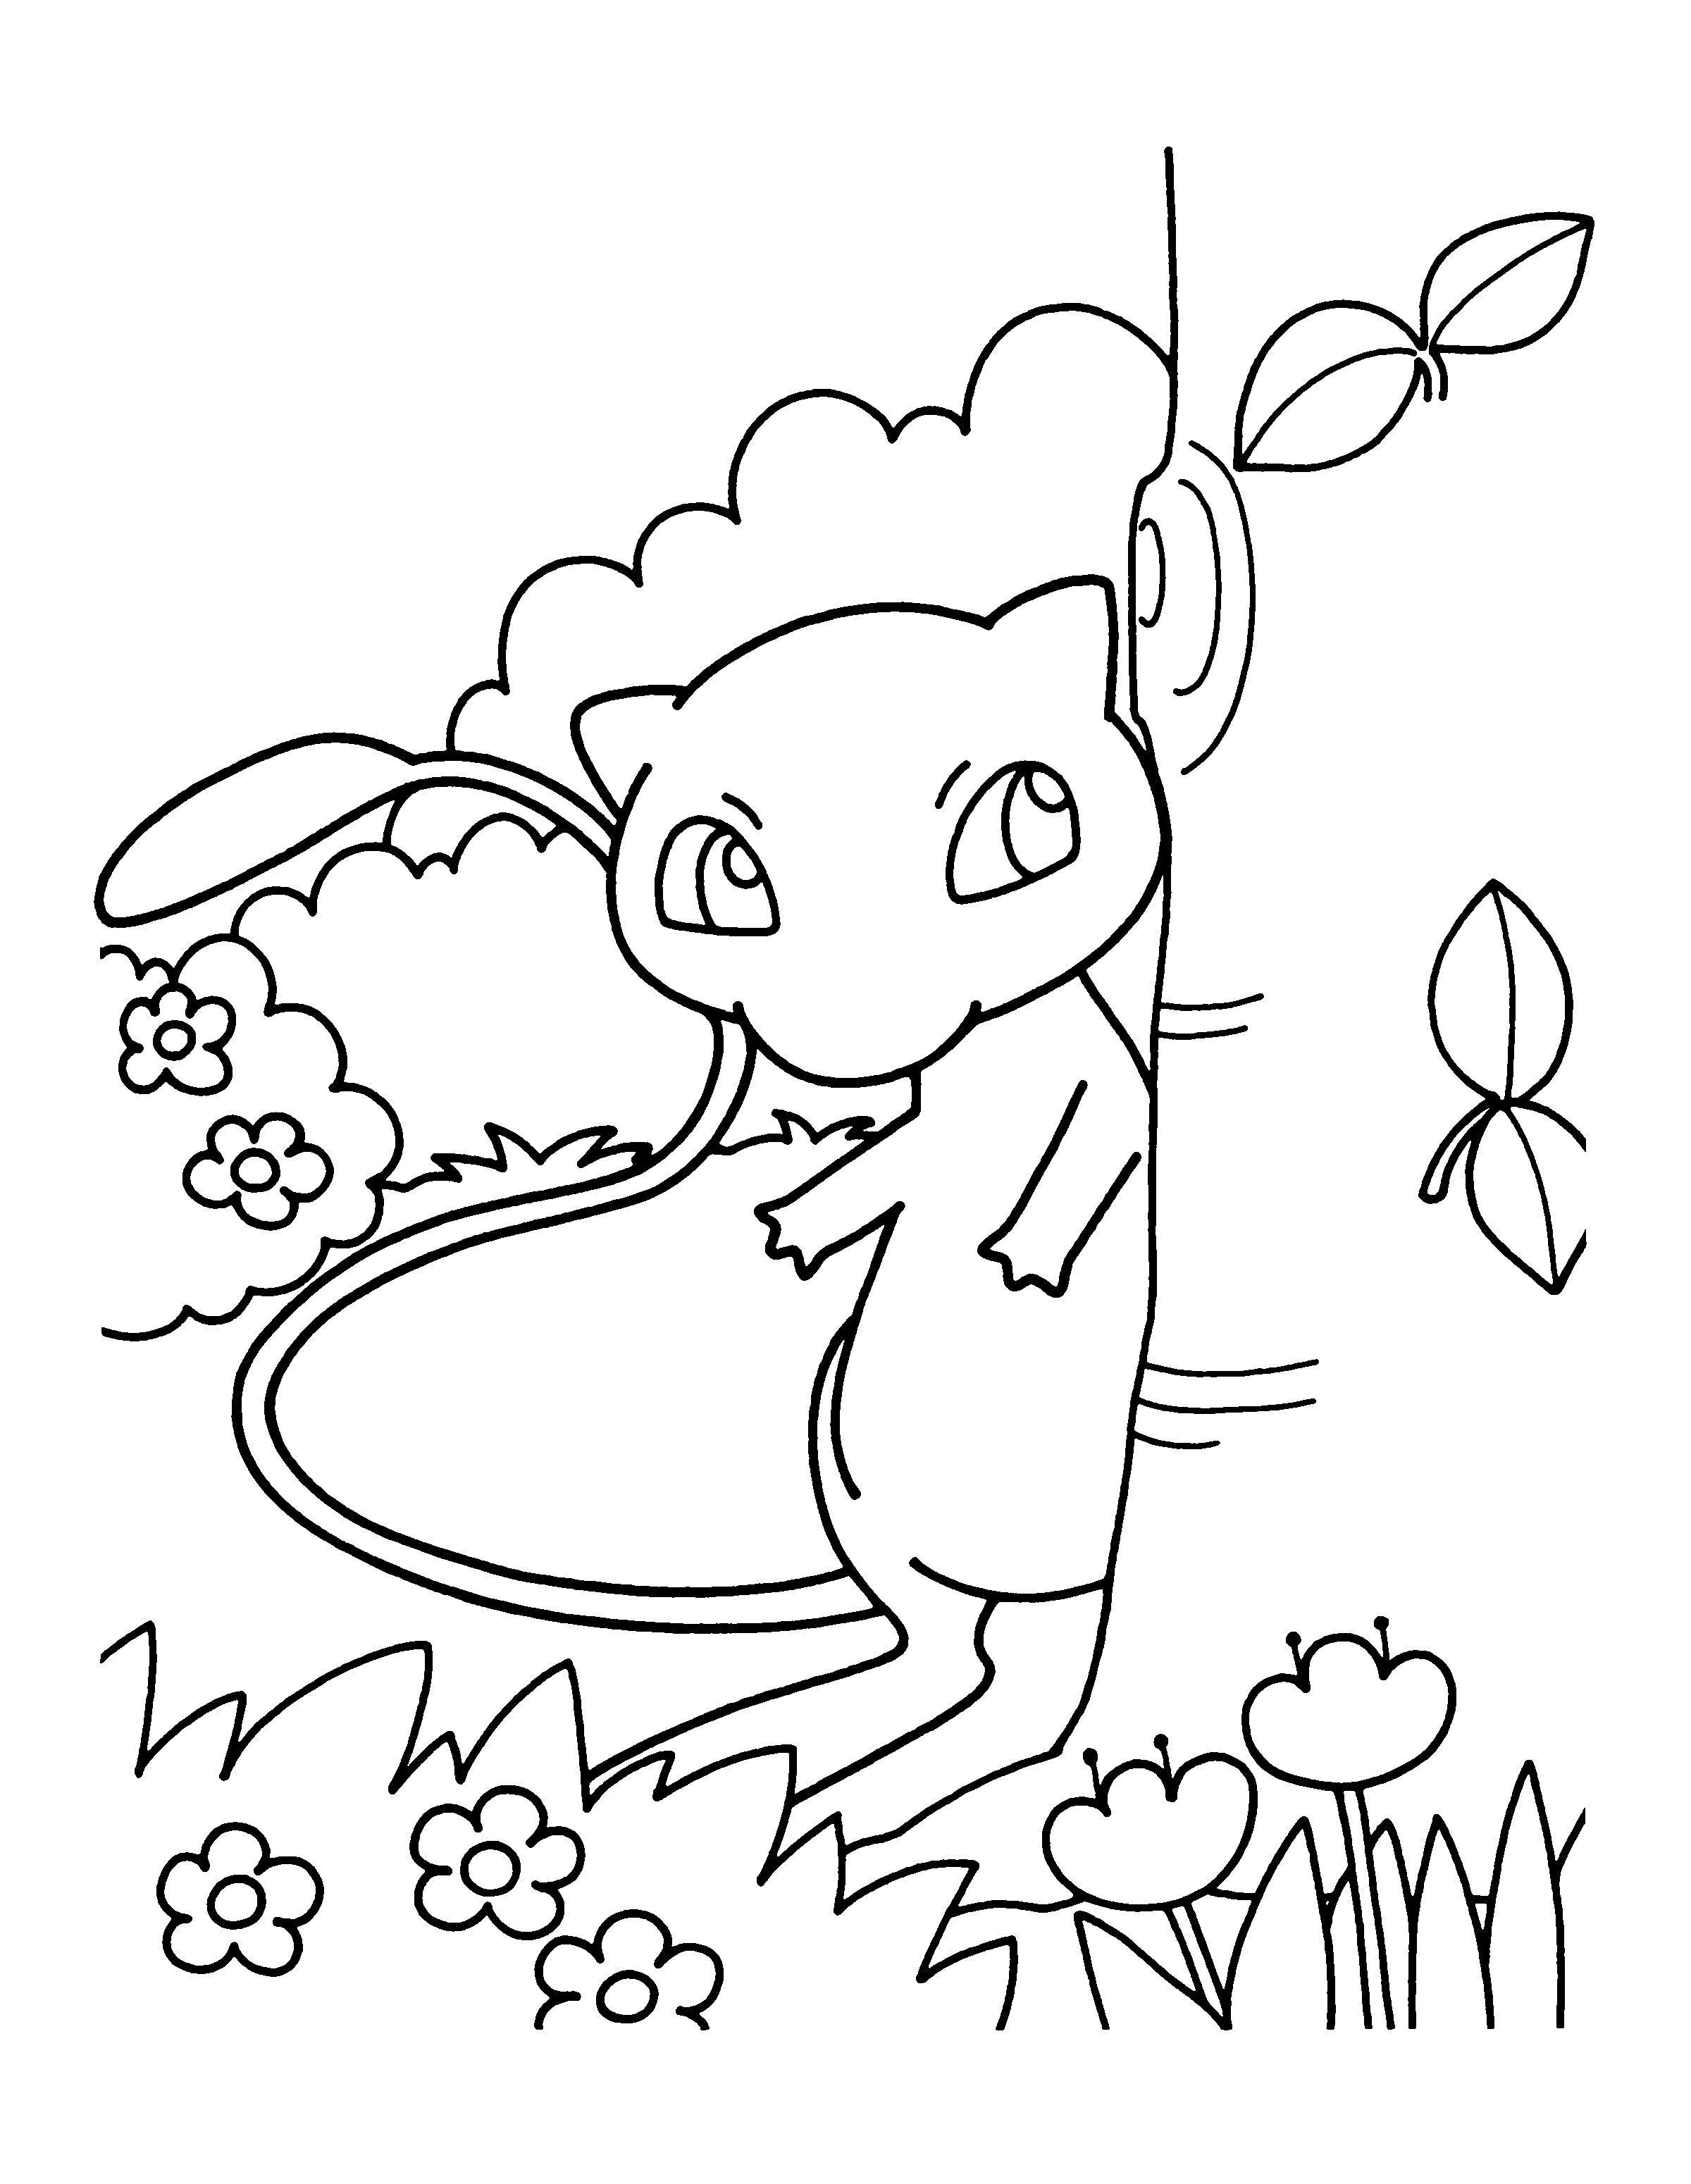 Mew Pokemon Cute coloring page